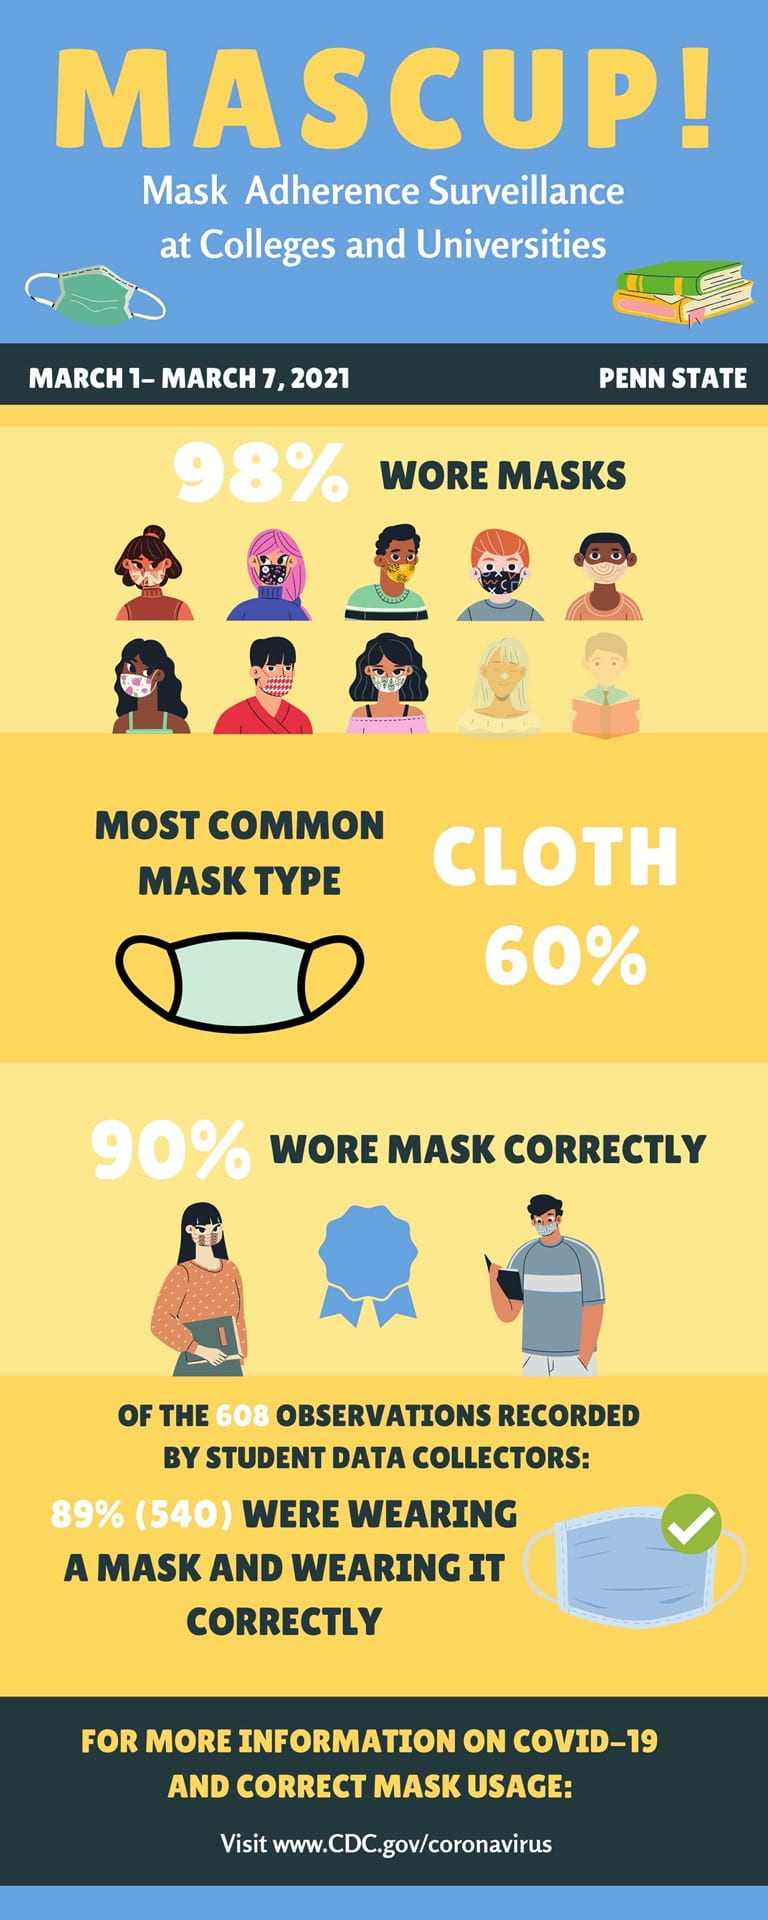 MASCUP! - Mask Adherence Surveillance at Colleges and Universities infographic from March 1 - March 7 2021. 98% wore masks; Most common mask type is Cloth at 60%; 90% wore mask correctly; Of the 608 observations recorded by student data collectors 89% were wearing a mask and wearing it correctly. For more info on COVID-19 mask usage: www.cdc.gov/cornavirus